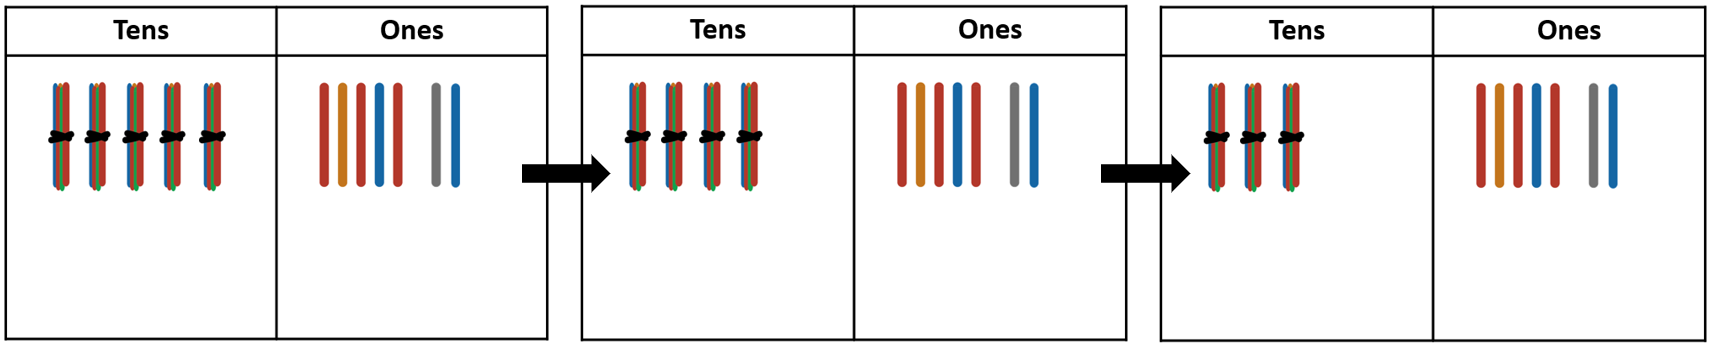 Image of 57, 47, and 37 made using bundled and individual ice block sticks on two-column place value charts. Arrows indicate that one bundle of 10 sticks is subtracted from each number (e.g. 57 - 10 = 47).